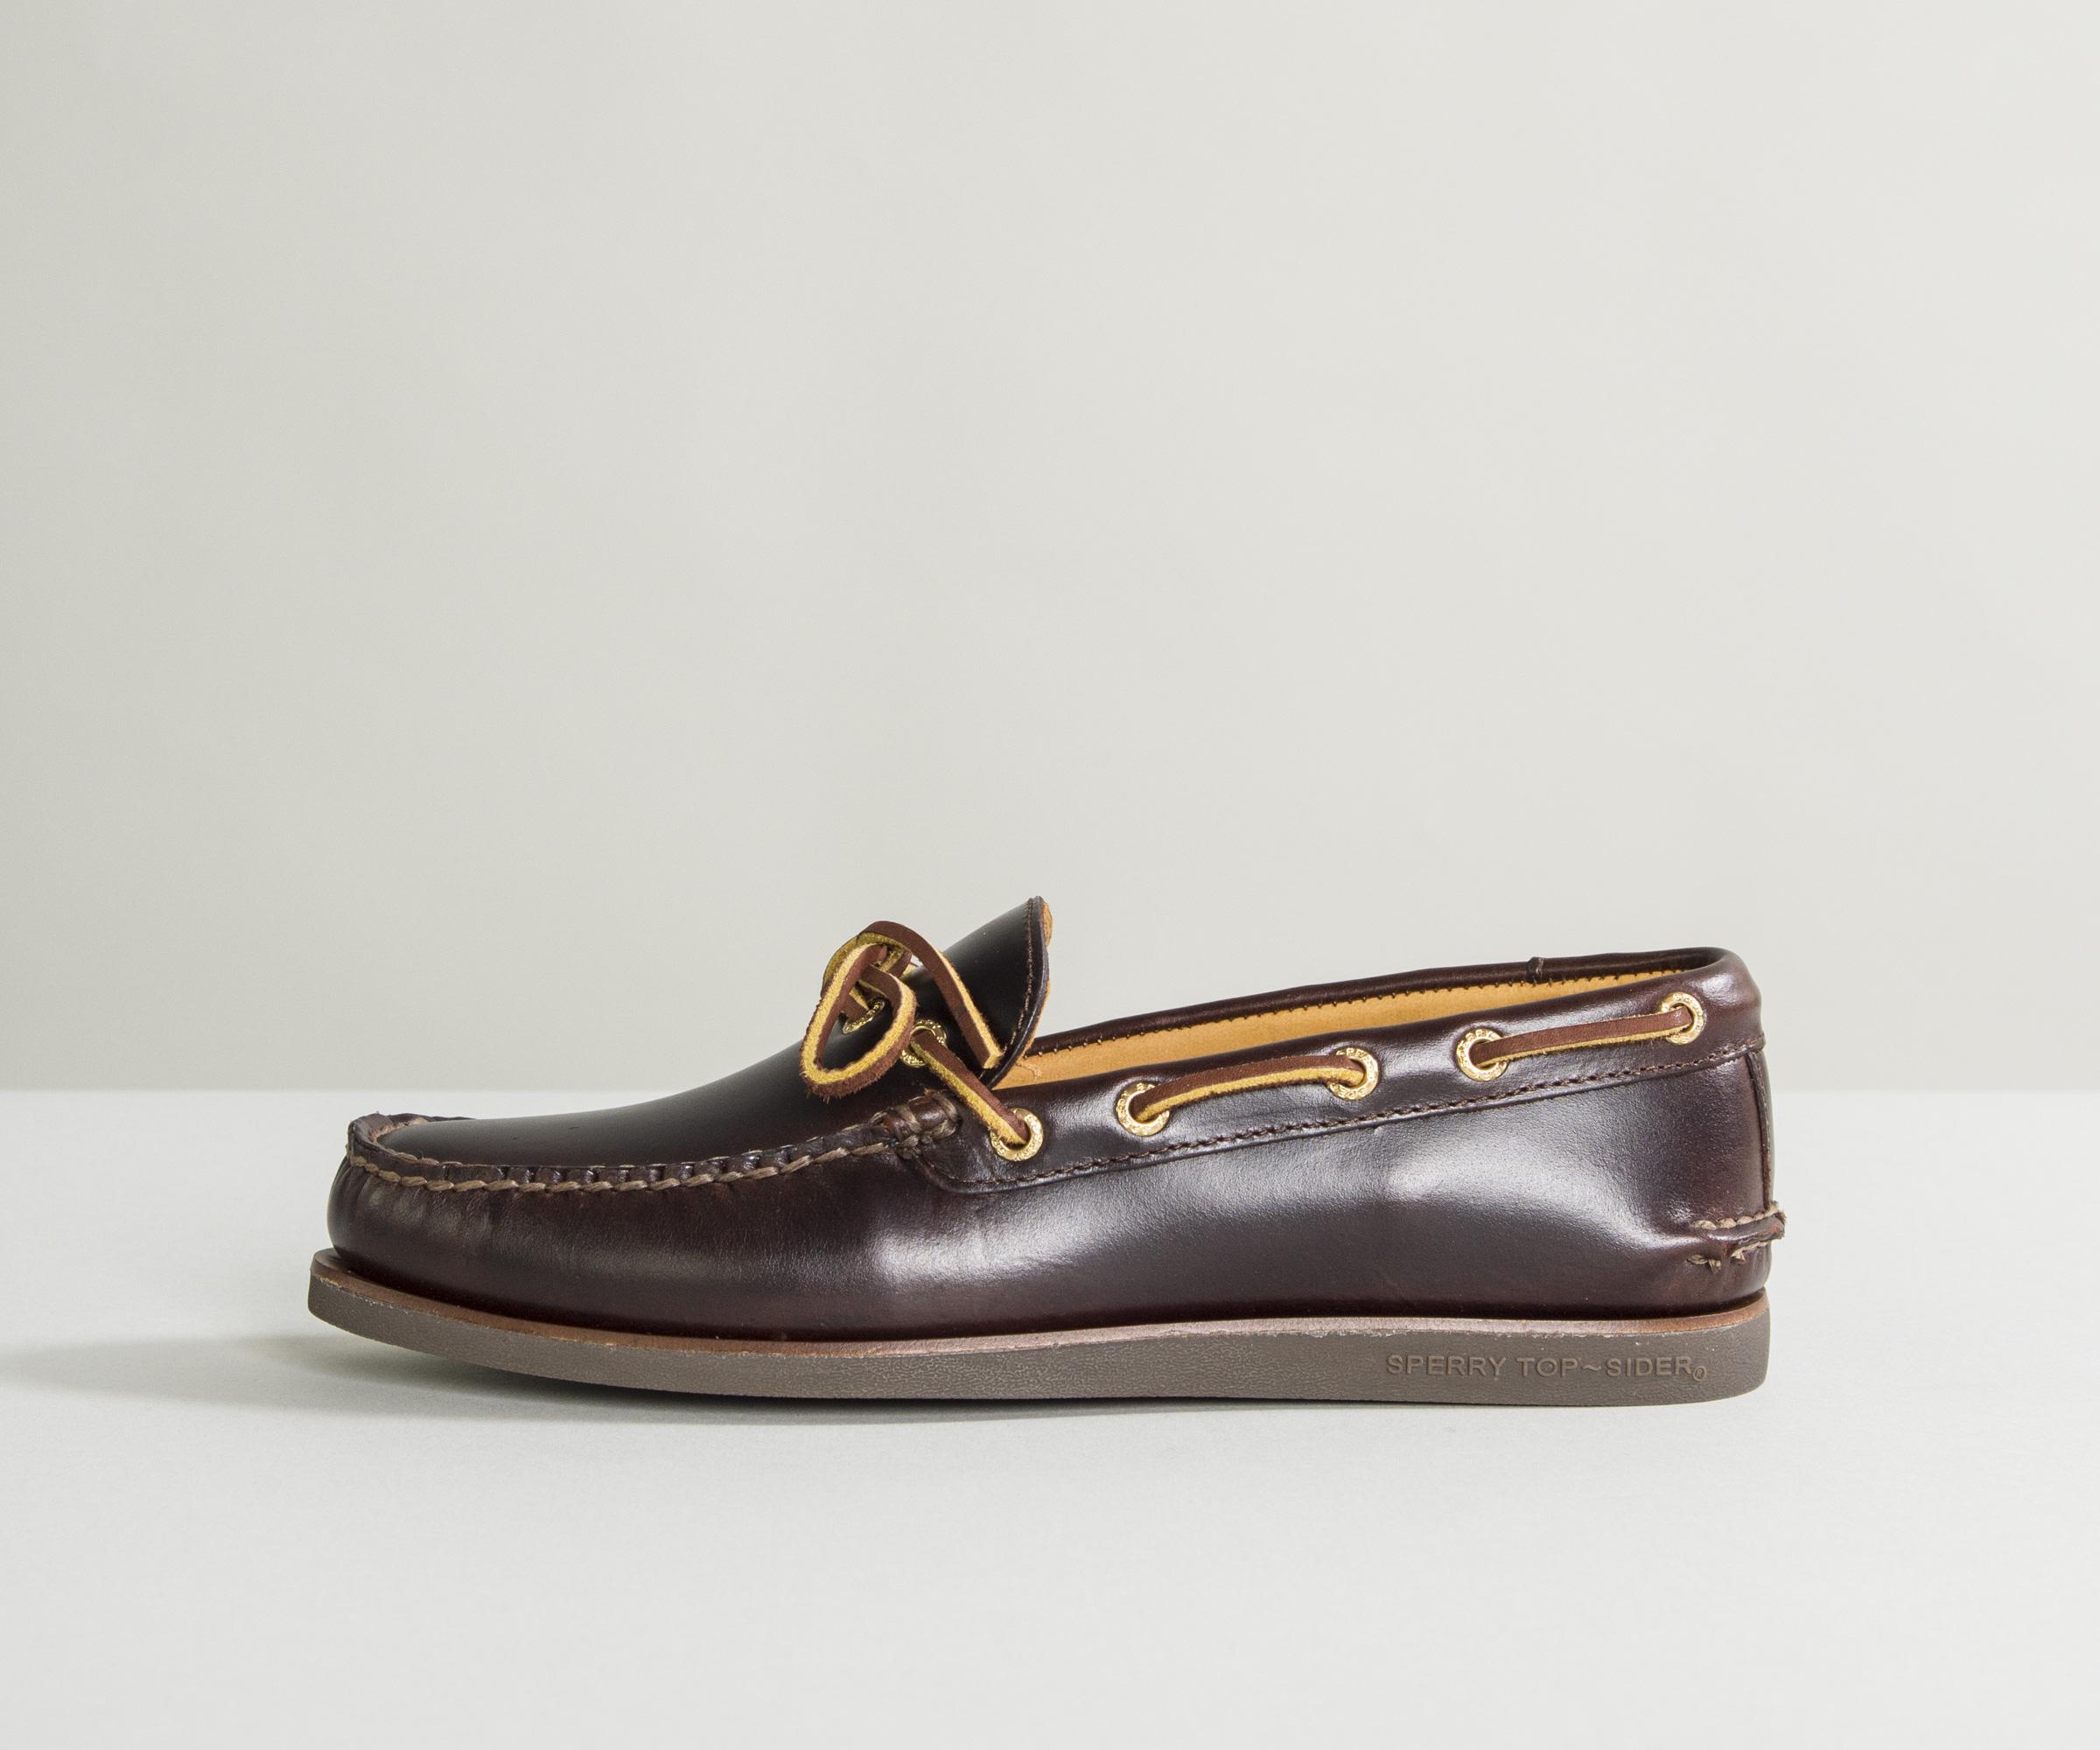 Lyst - Sperry Top-Sider 'top-sider' Gold Cup Luxury Deck Shoes Amaretto ...